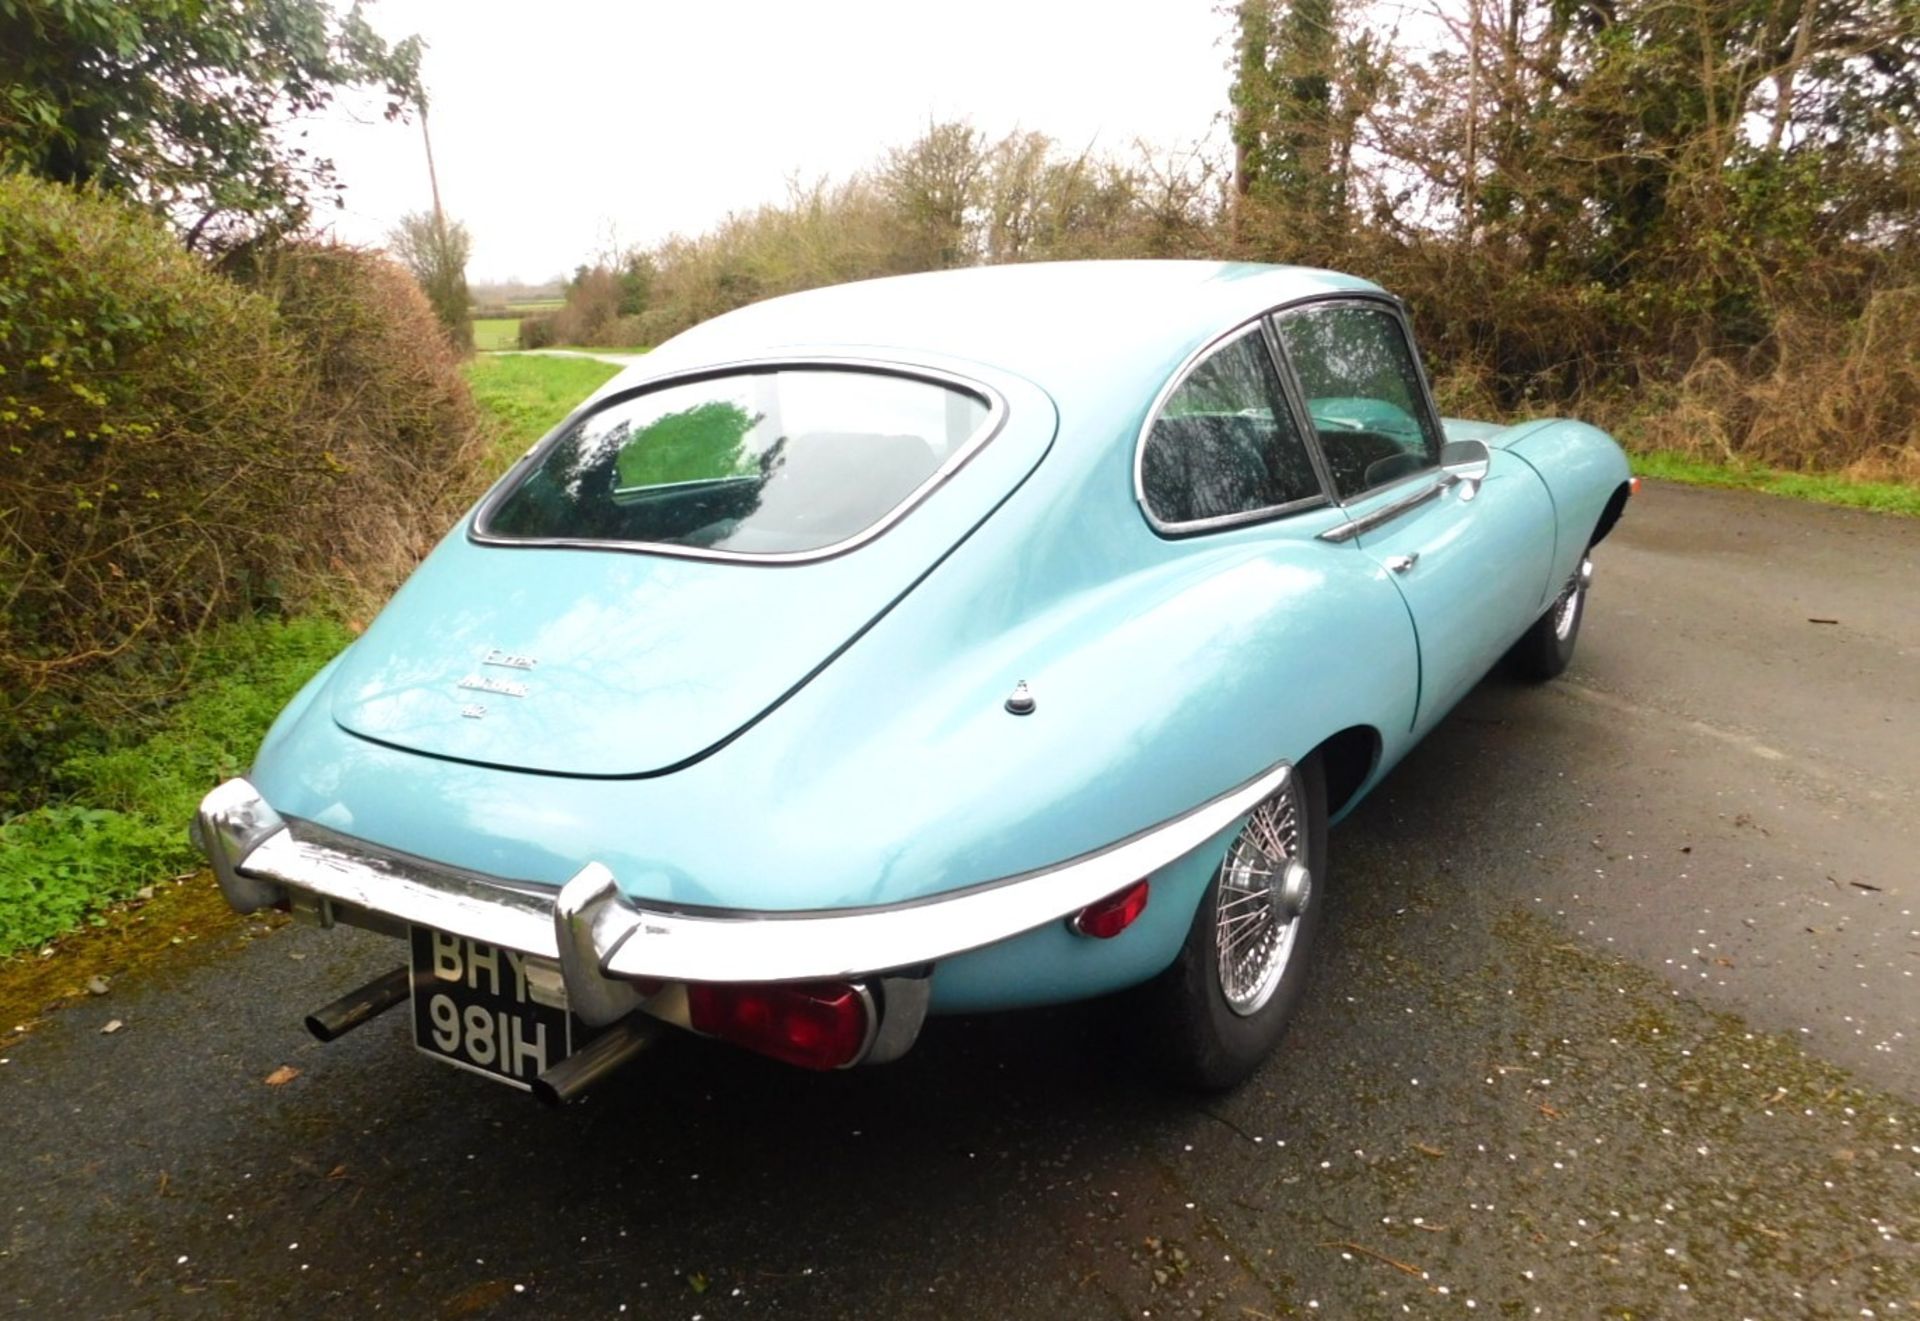 1970 JAGUAR E-TYPE SERIES II 2+2 COUPE Registration Number: BHY 981H Chassis Number: P1R44144BW - Image 3 of 33